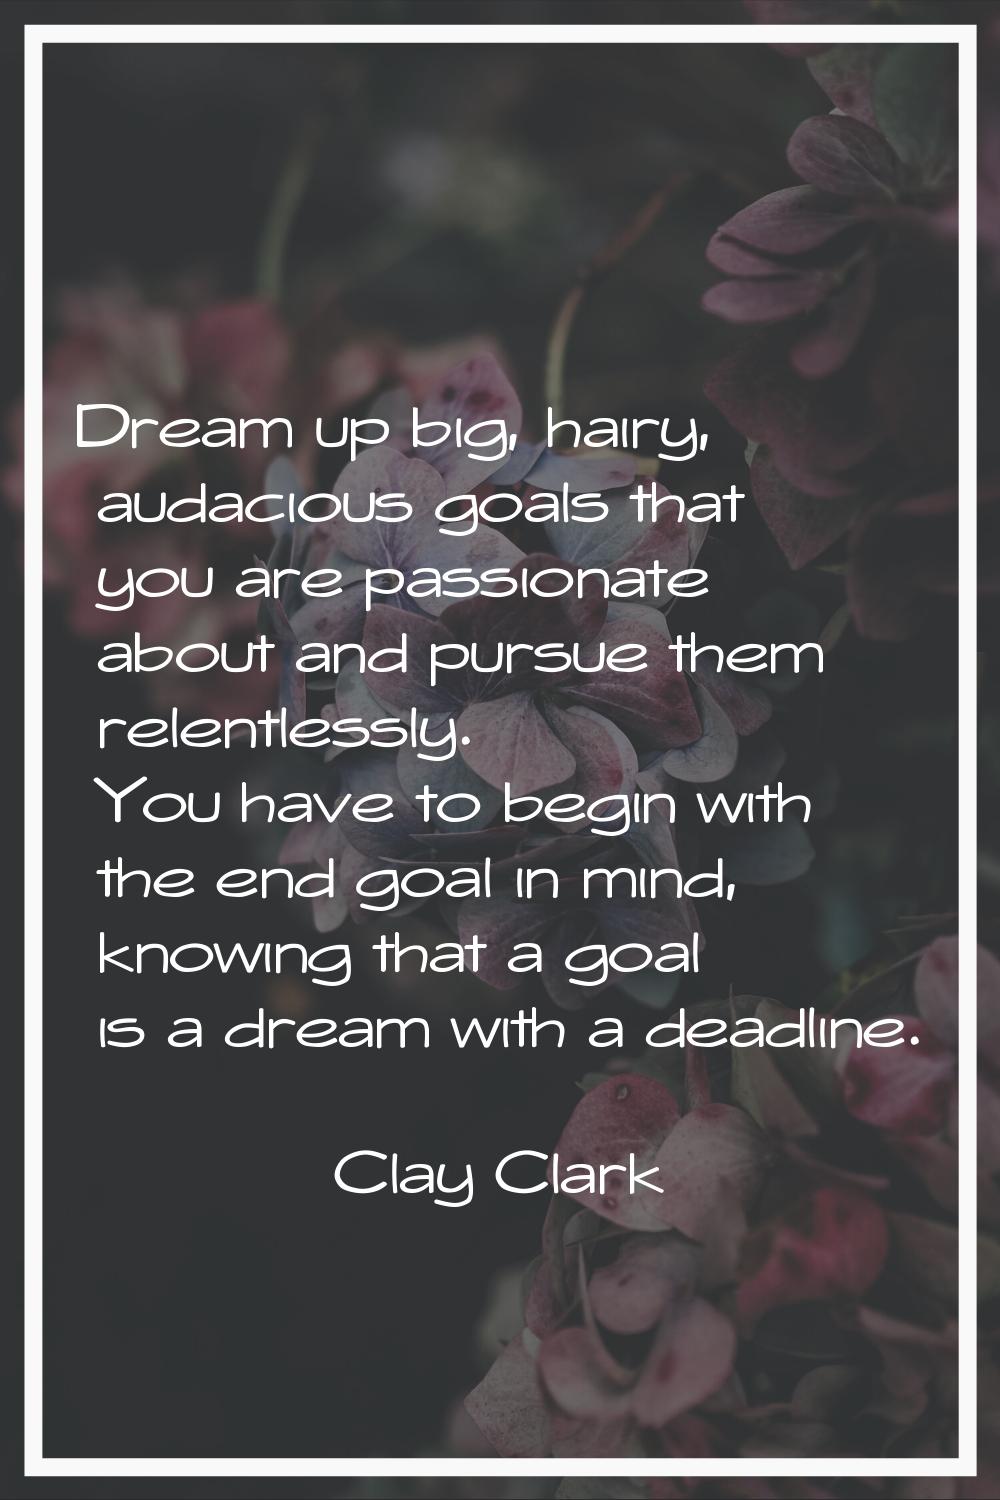 Dream up big, hairy, audacious goals that you are passionate about and pursue them relentlessly. Yo